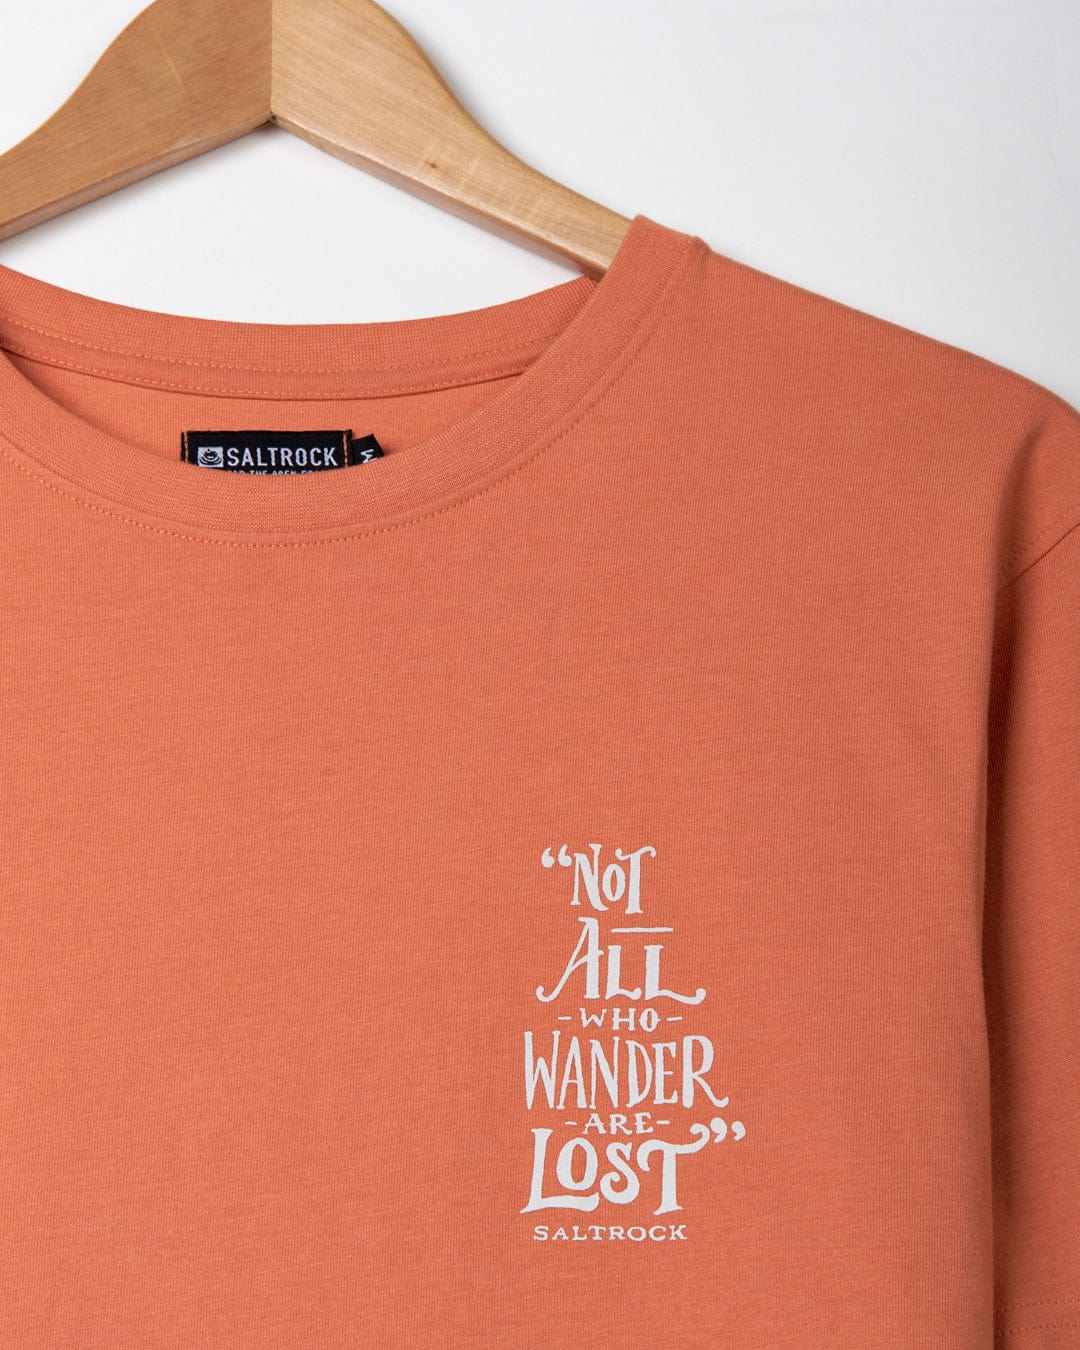 This Lost Ships - Mens Short Sleeve T-Shirt - Orange from Saltrock branding is made of a Cotton/Polyester blend, featuring the Saltrock classic design with the phrase "not all who wander are lost.